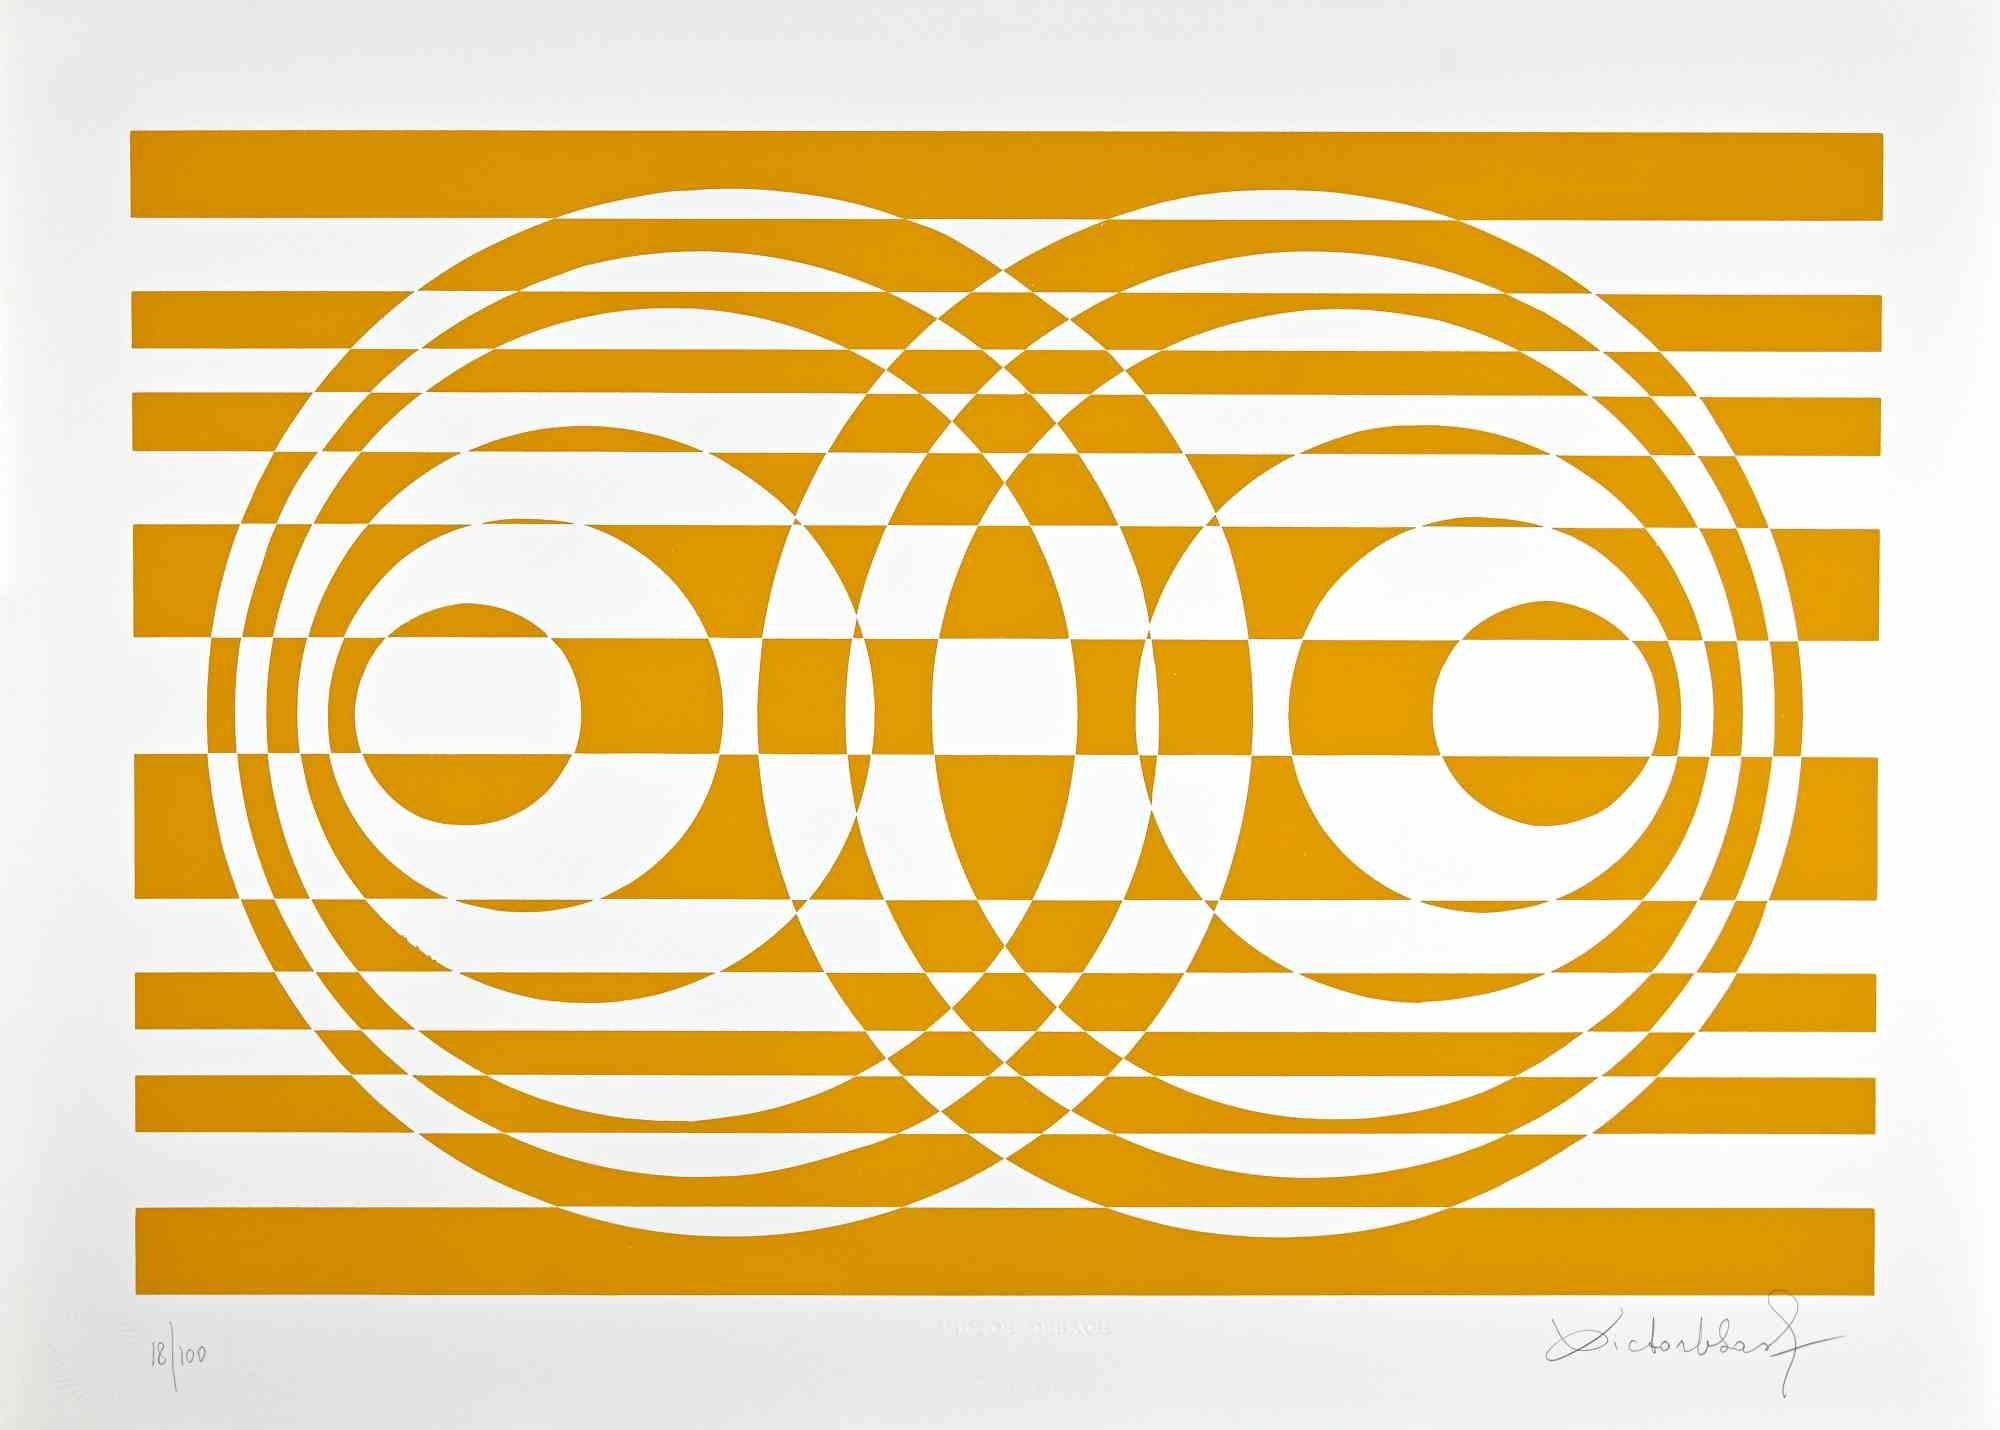 Abstract Yellow Composition is a Screen Print on Paper realized by Victor Debach in 1970s.

Limited edition of 100 copies numbered and signed by the artist with pencil on the lower margin.

Very good condition on a white cardboard.